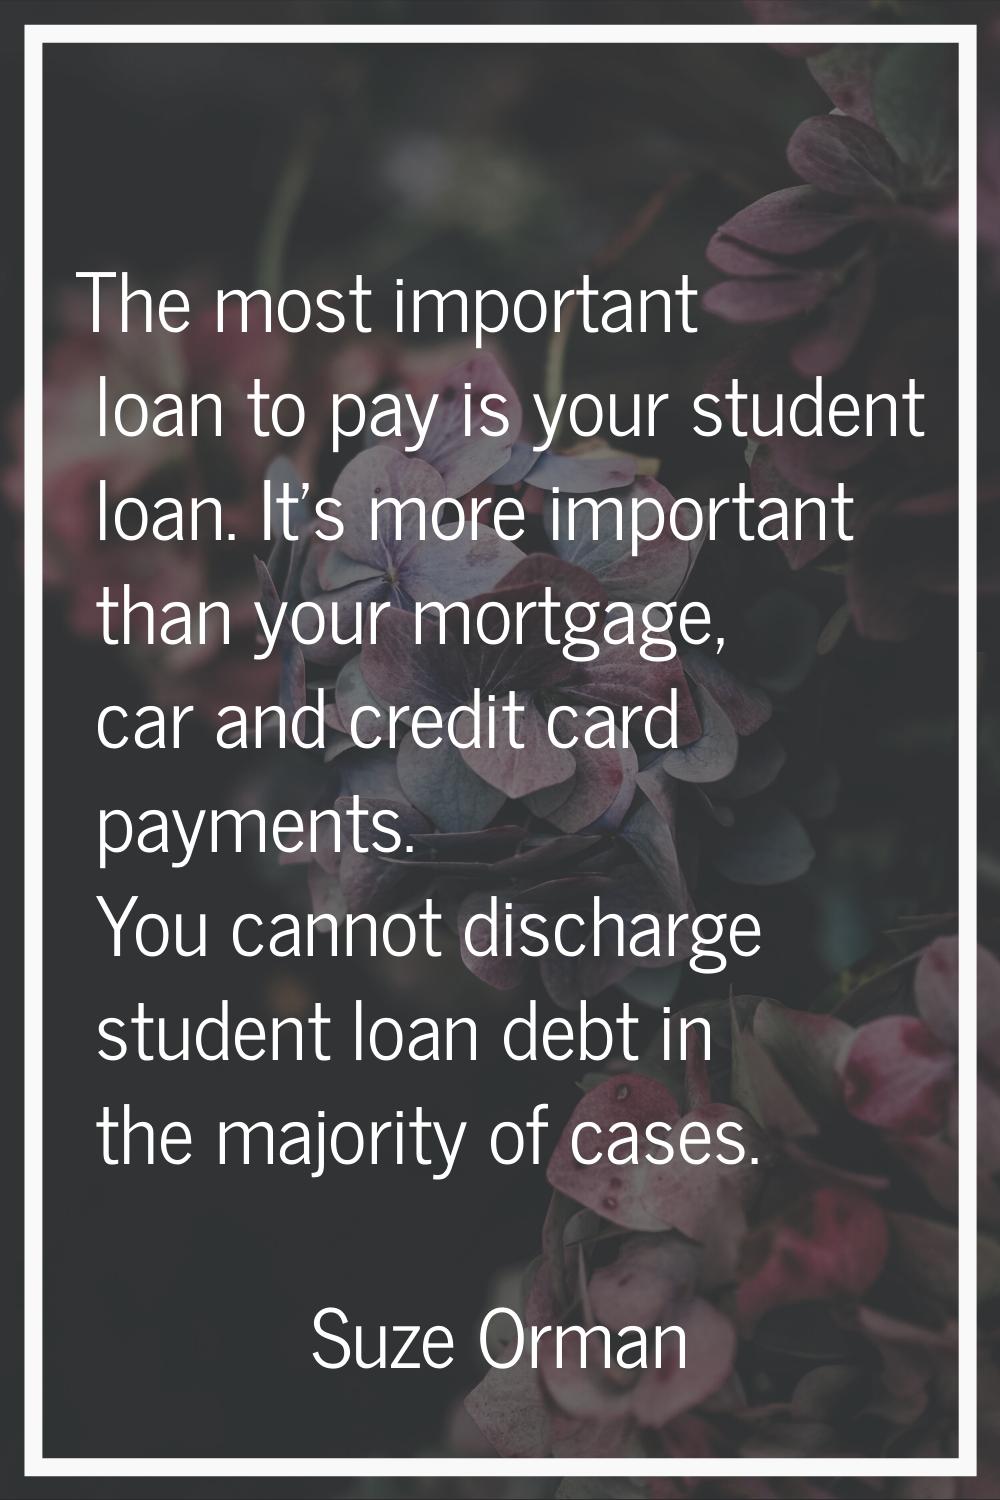 The most important loan to pay is your student loan. It's more important than your mortgage, car an